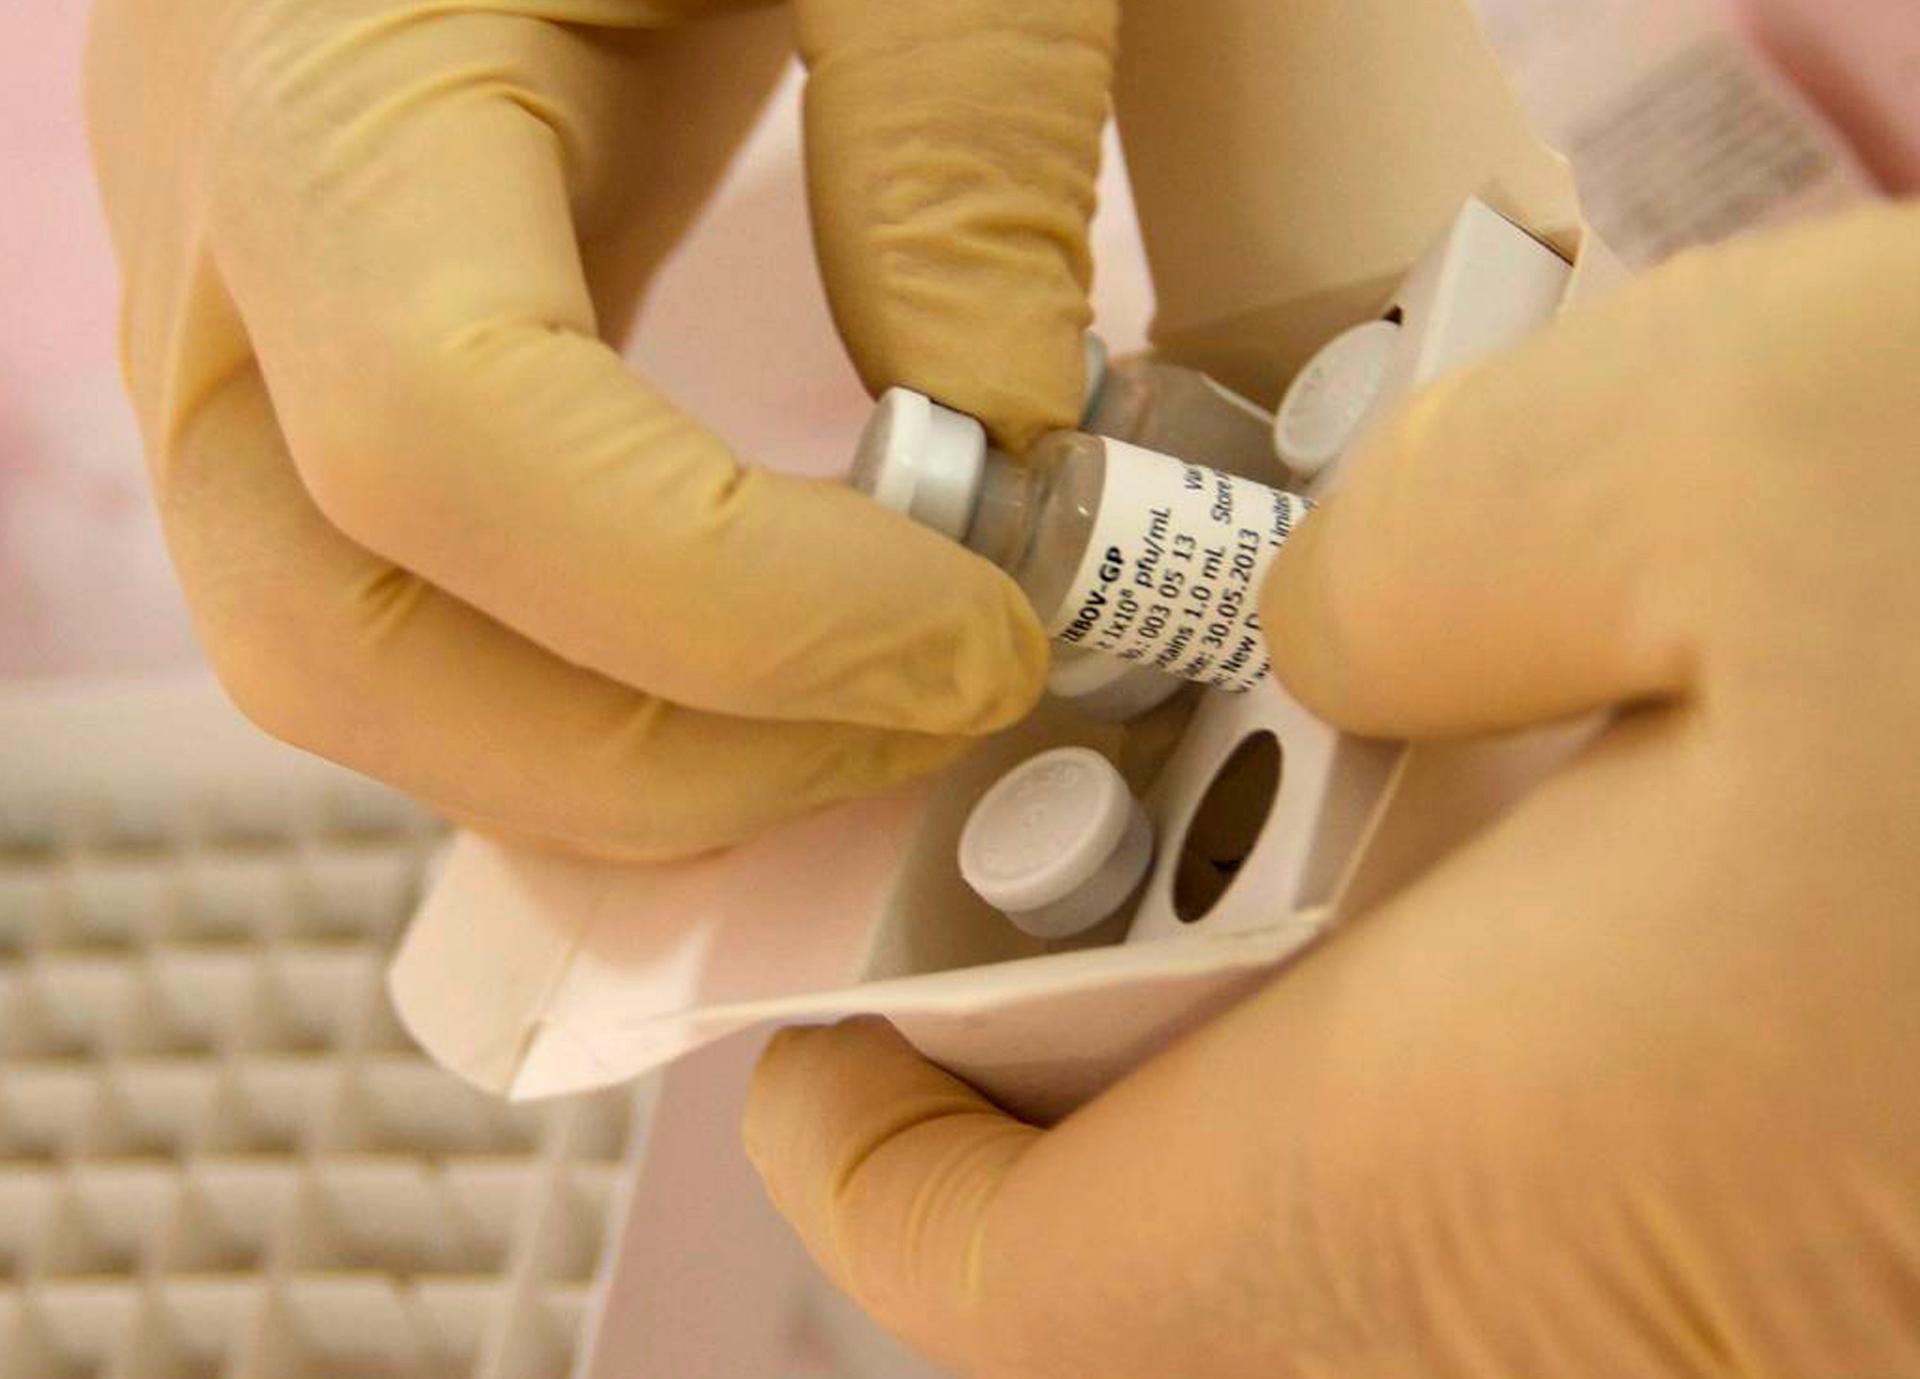 Scientists at the National Microbiology Lab in Winnipeg, Manitoba, prepare an experimental Ebola vaccine for shipment to the World Health Organization.